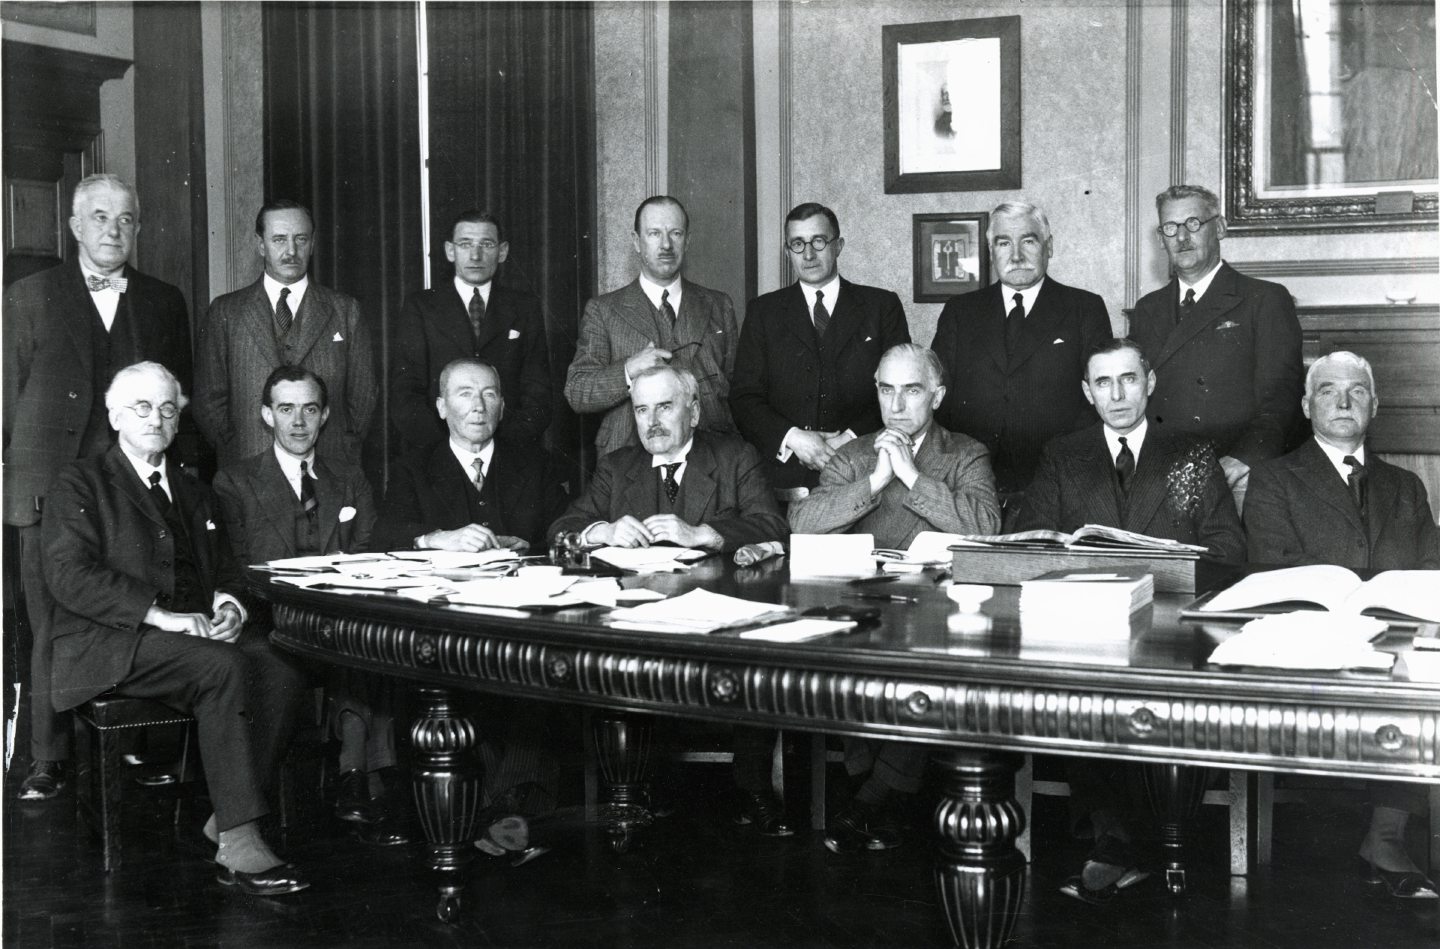 Infirmary Board - the first meeting in the new infirmary of Foresterhill Hospital in 1936.